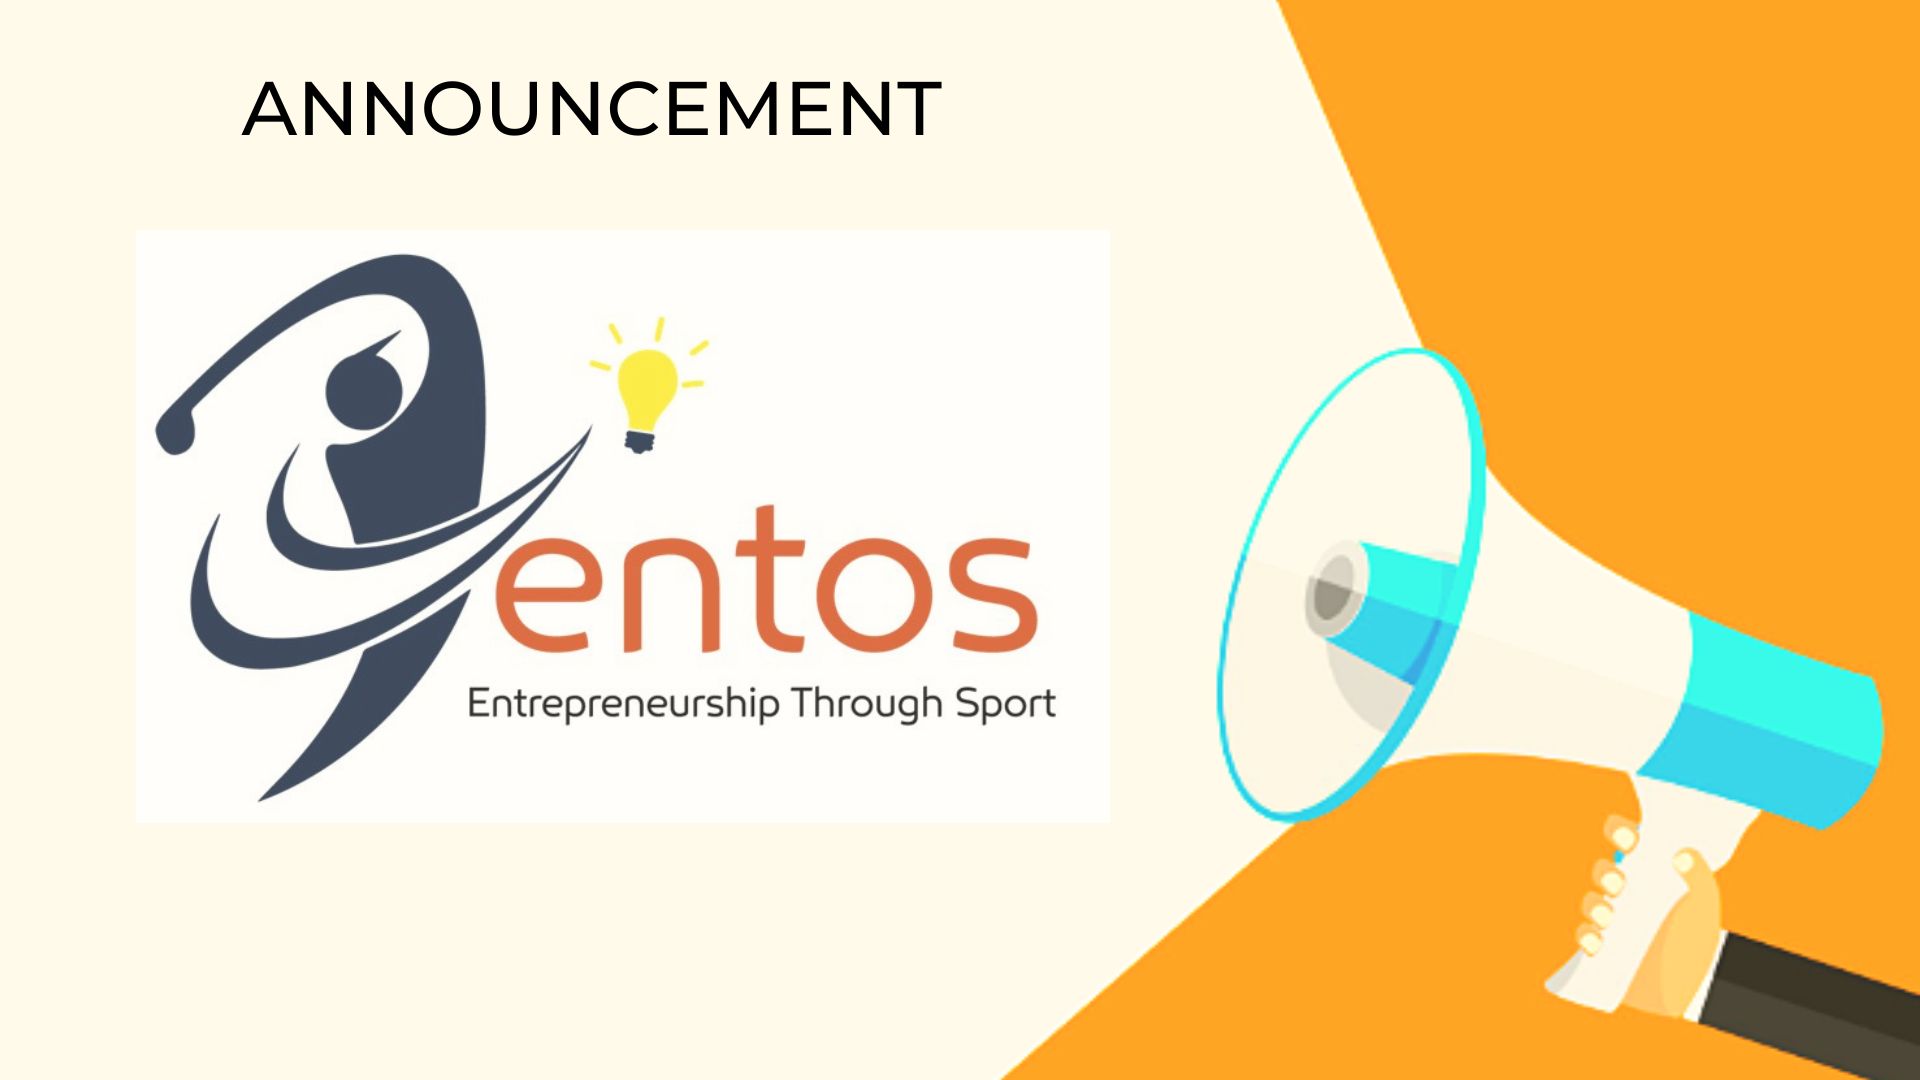 ENTOS Newsletter 4 -Events Announcement: ENTOS is COming To YOU !